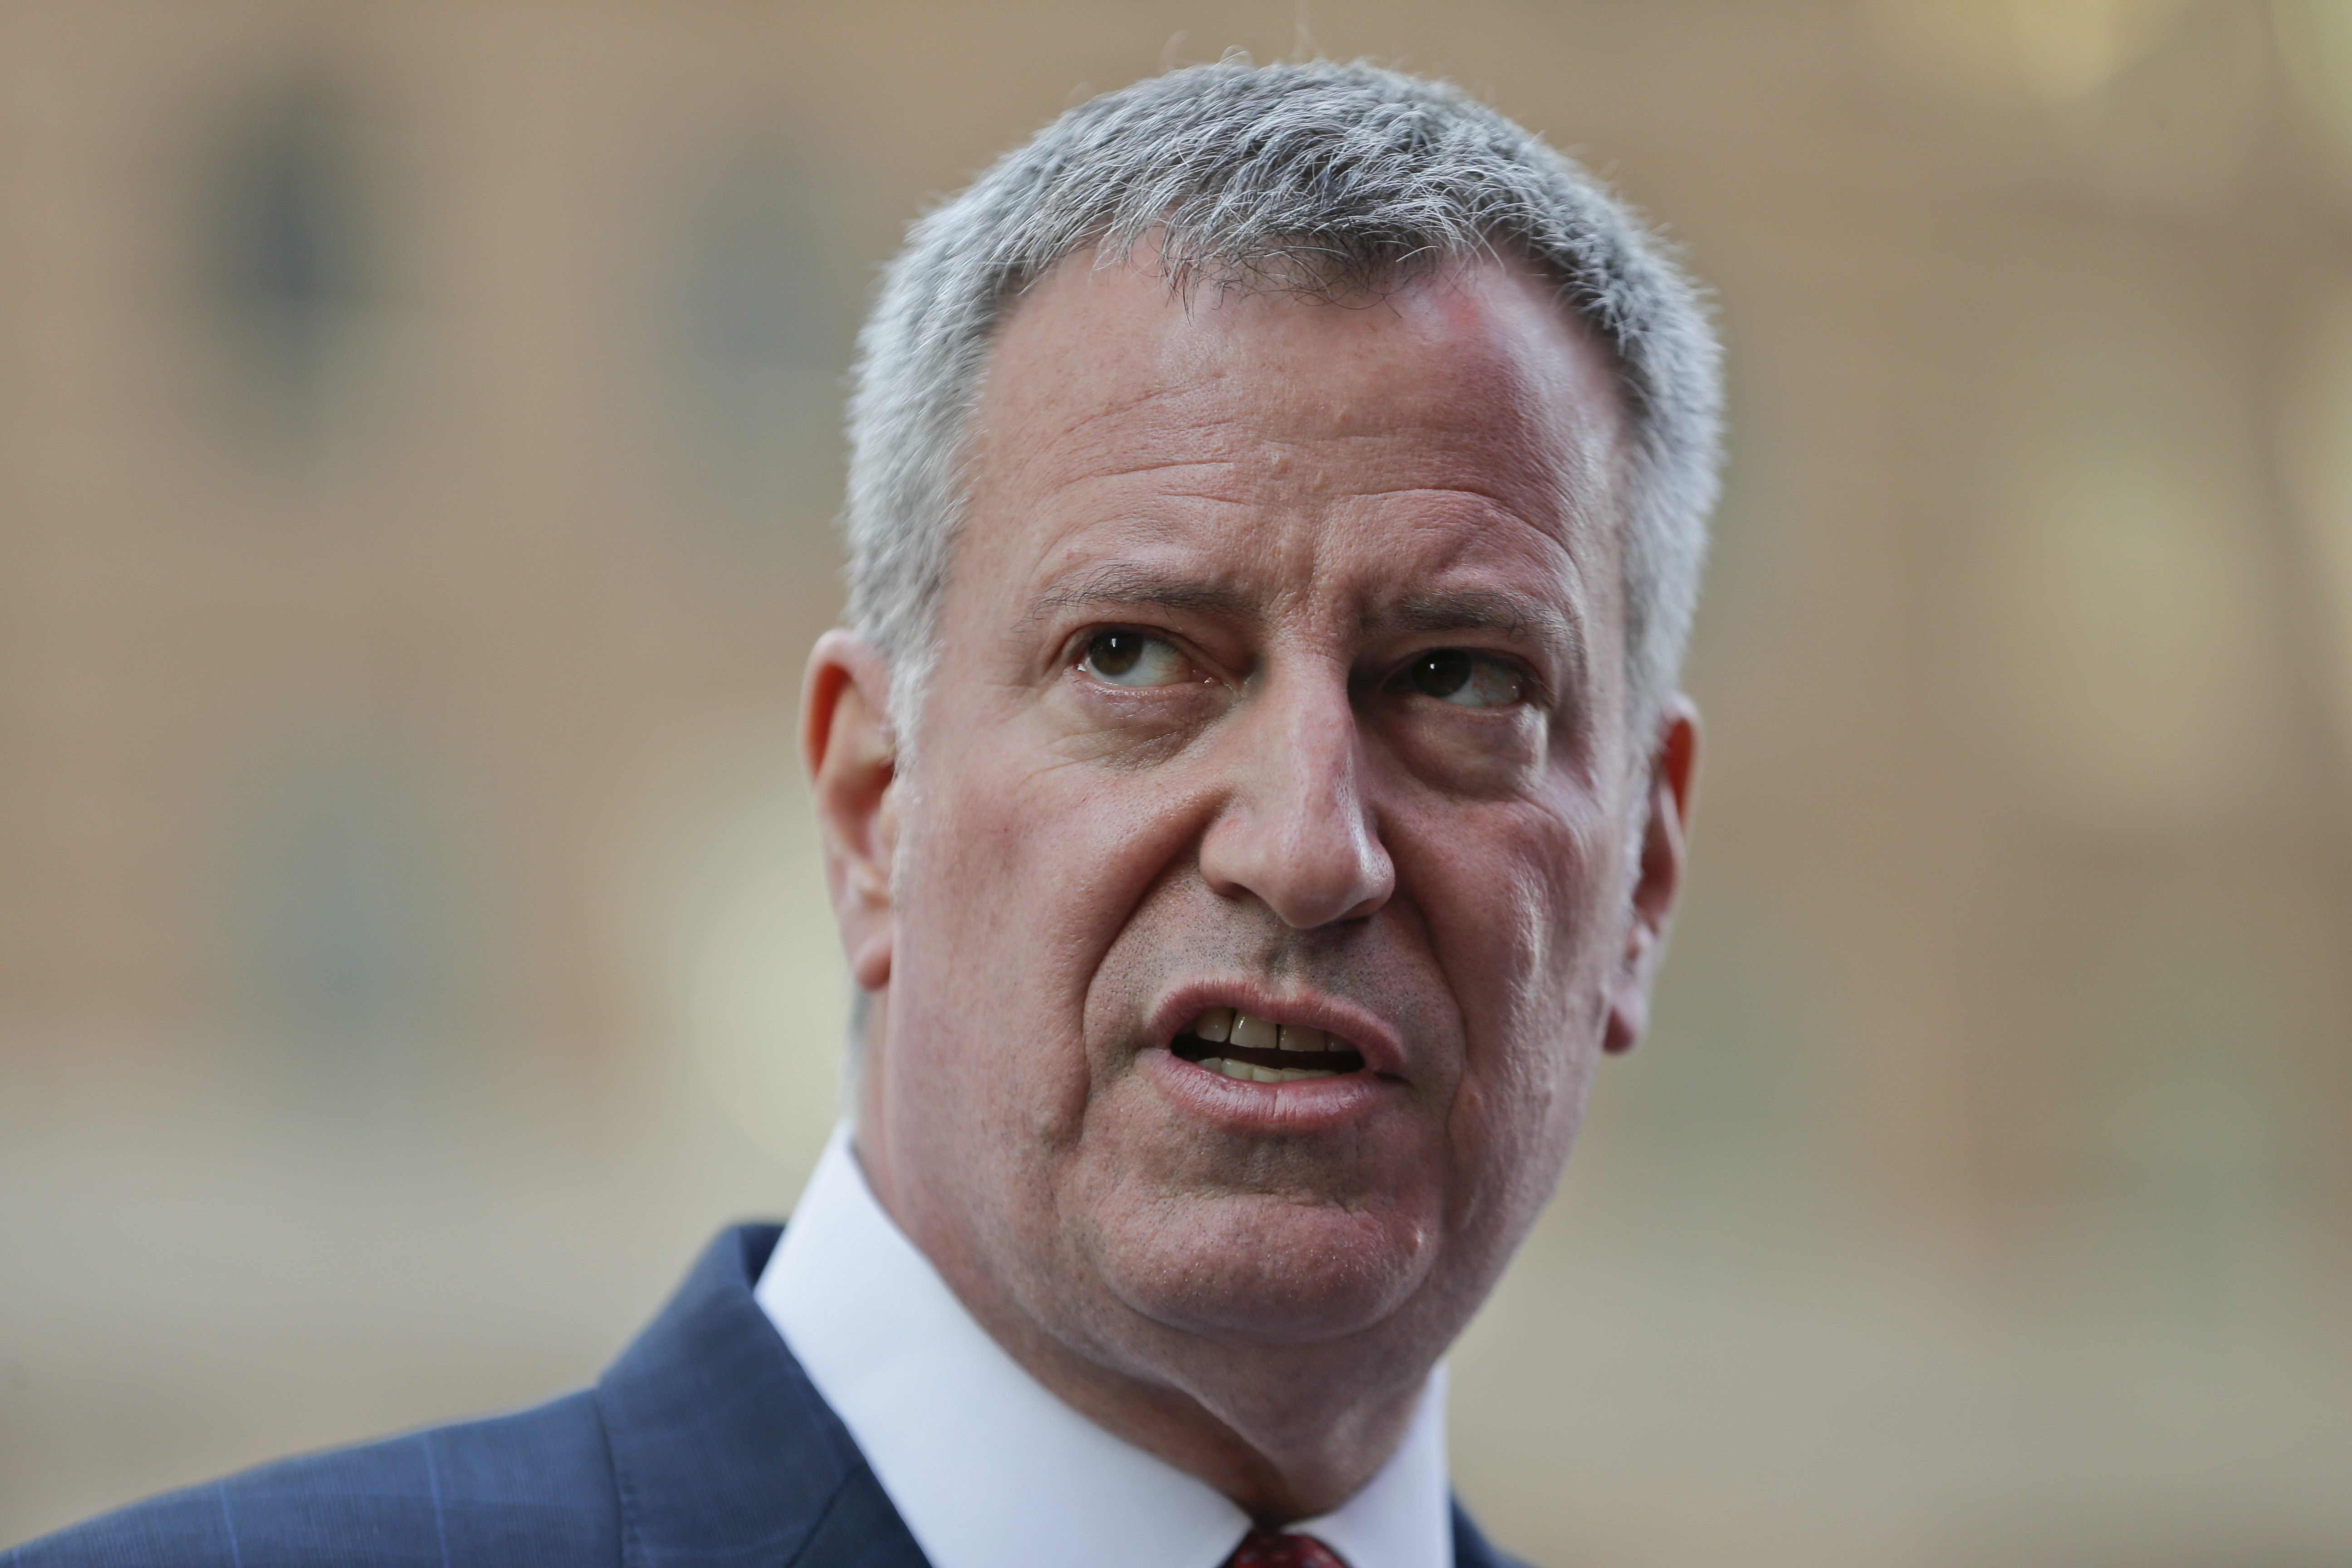 New York City Mayor Bill de Blasio speaks during a news conference in Times Square March 22, 2016 in New York City. 